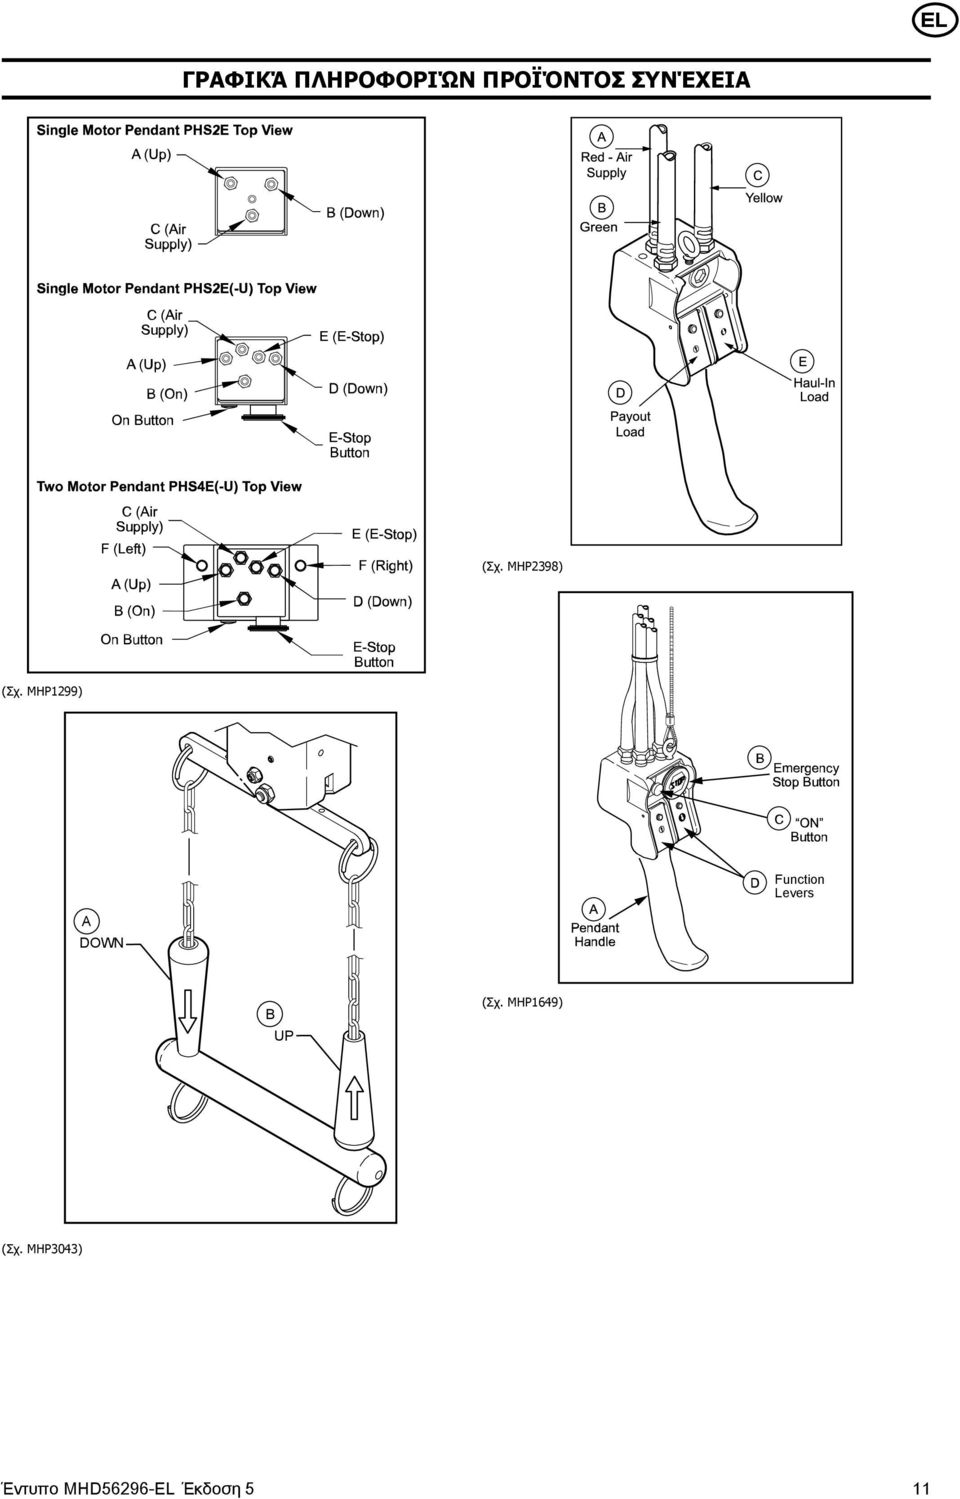 MHP1299) Function Levers A DOWN B UP